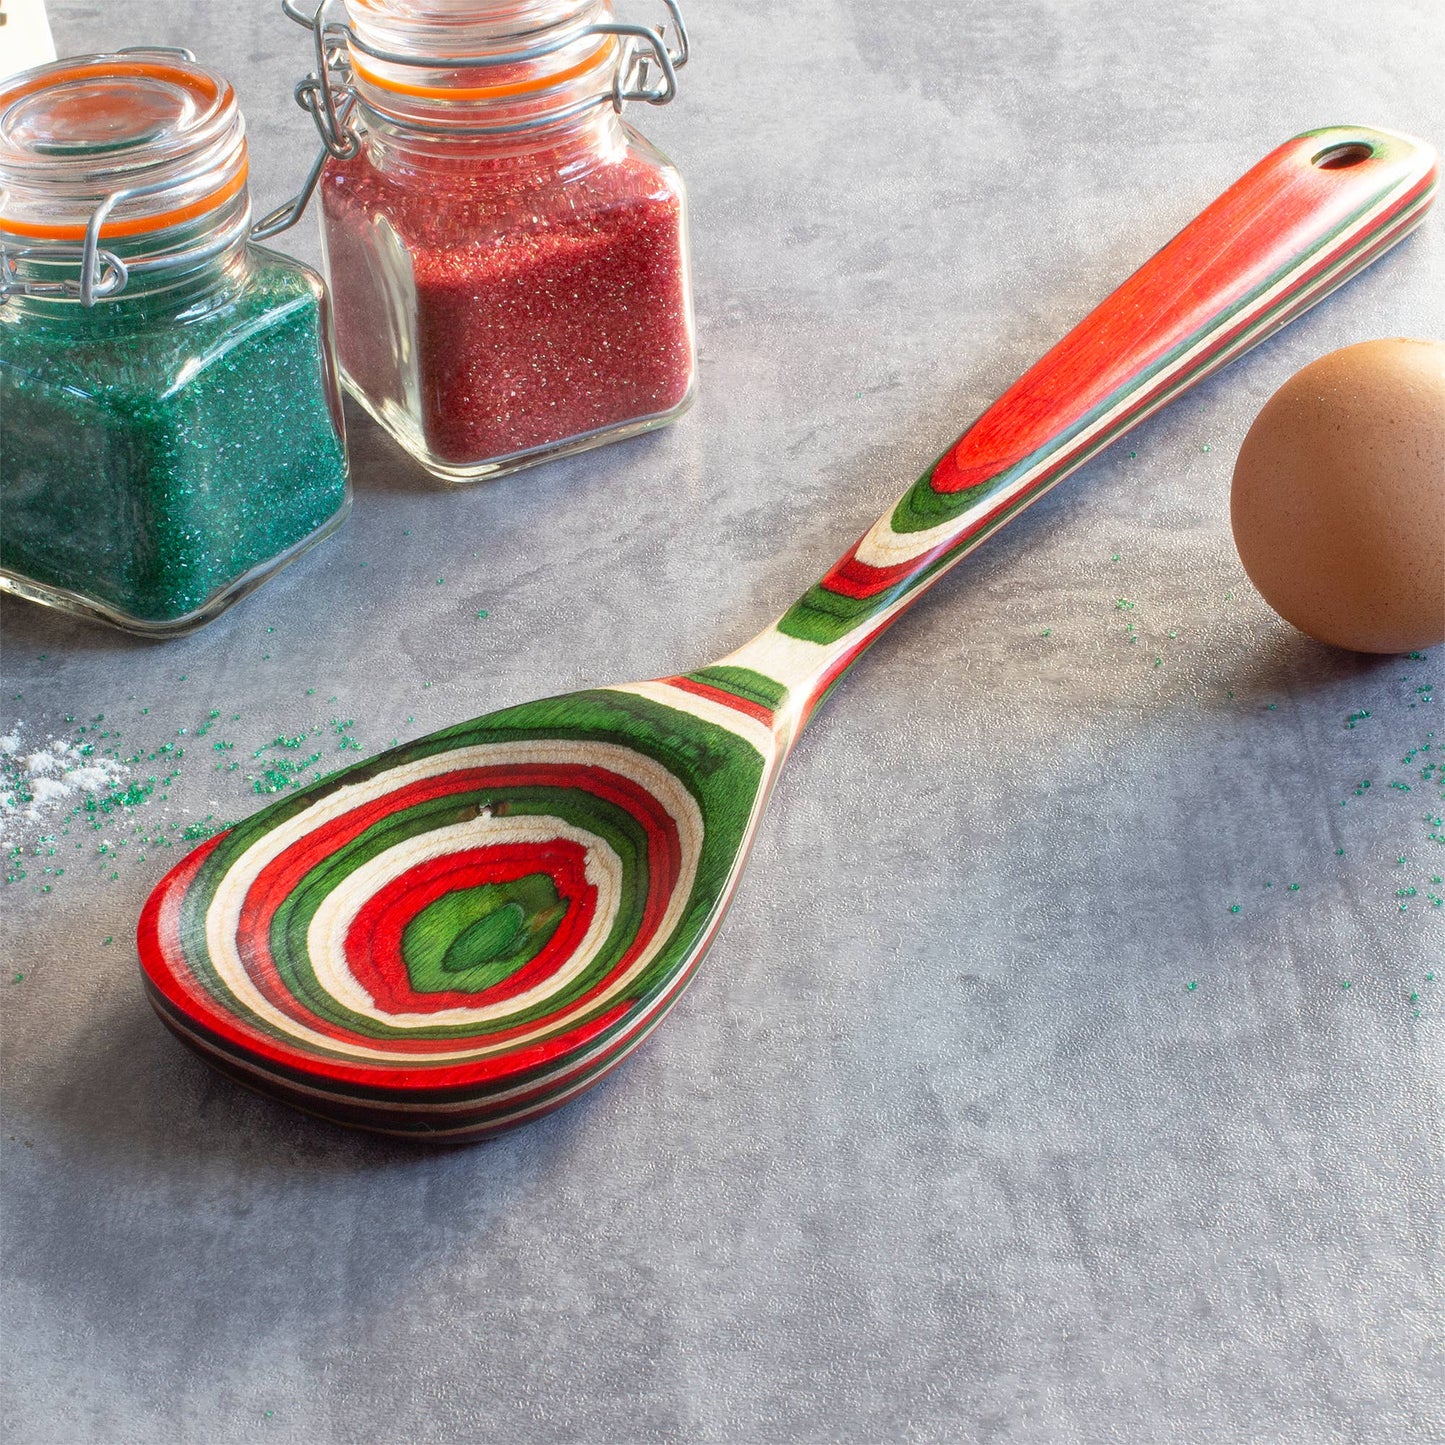 Baltique® North Pole Collection Cooking Spoon